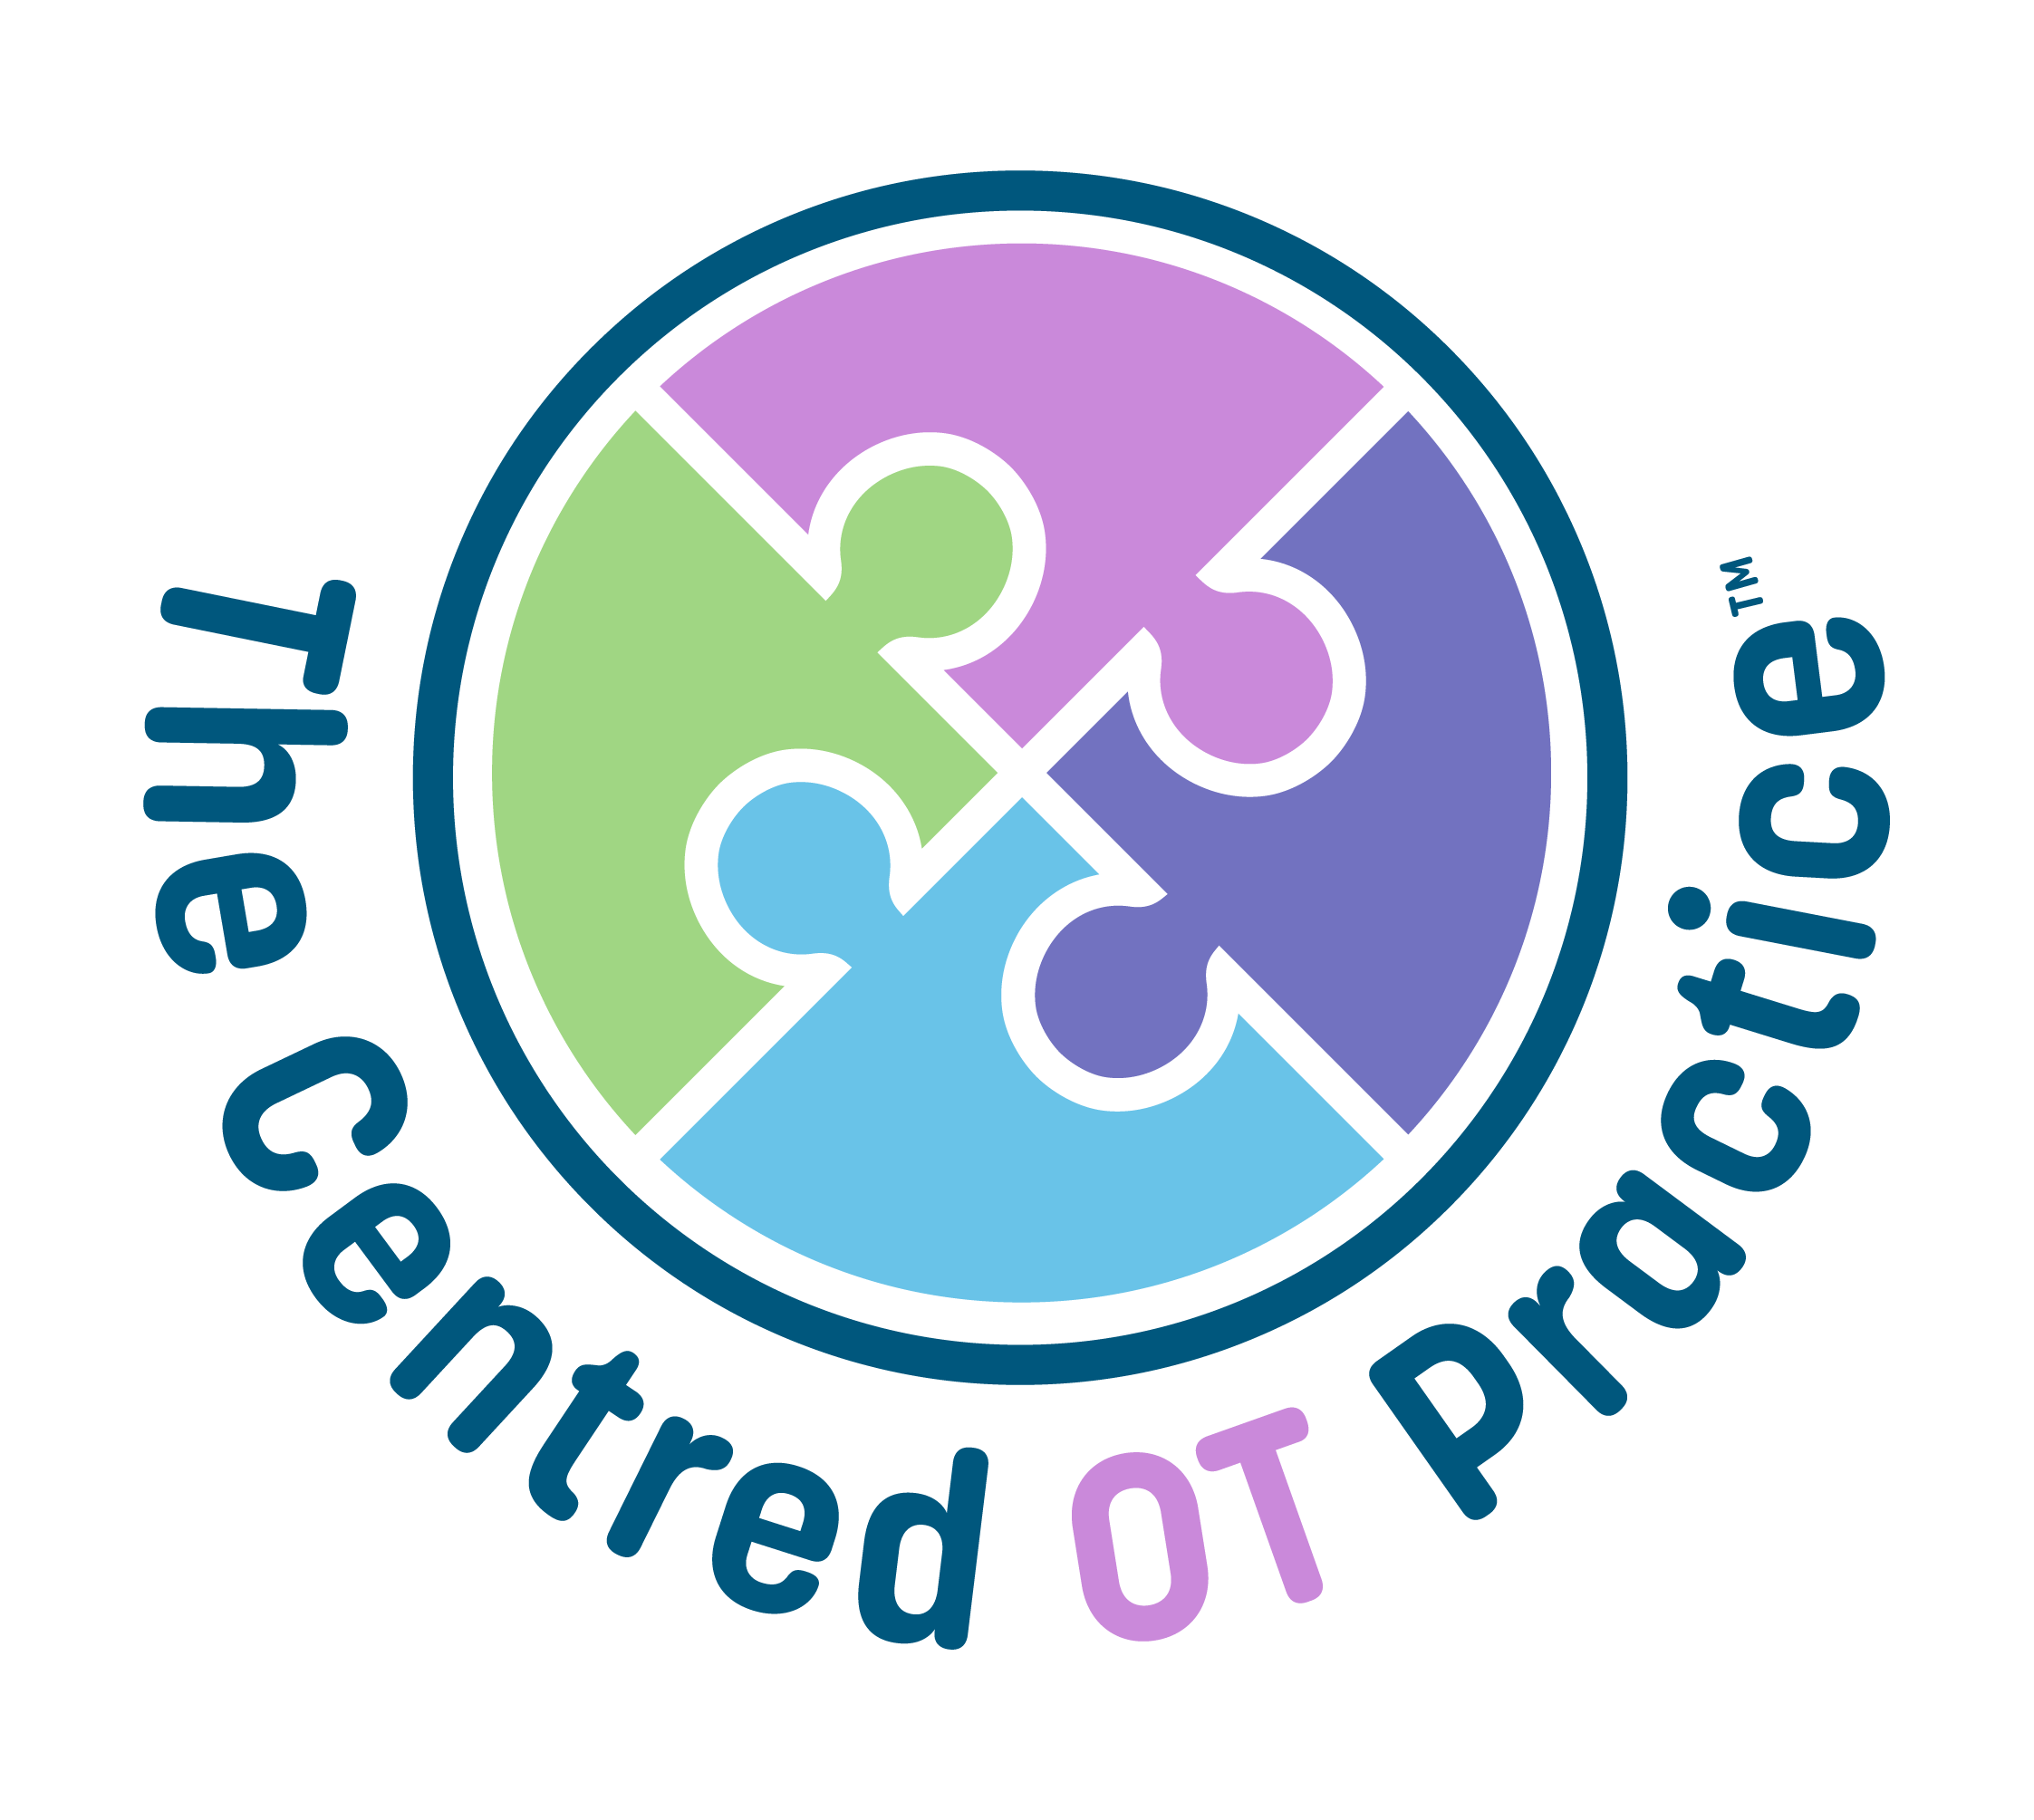 The Centred OT Practice